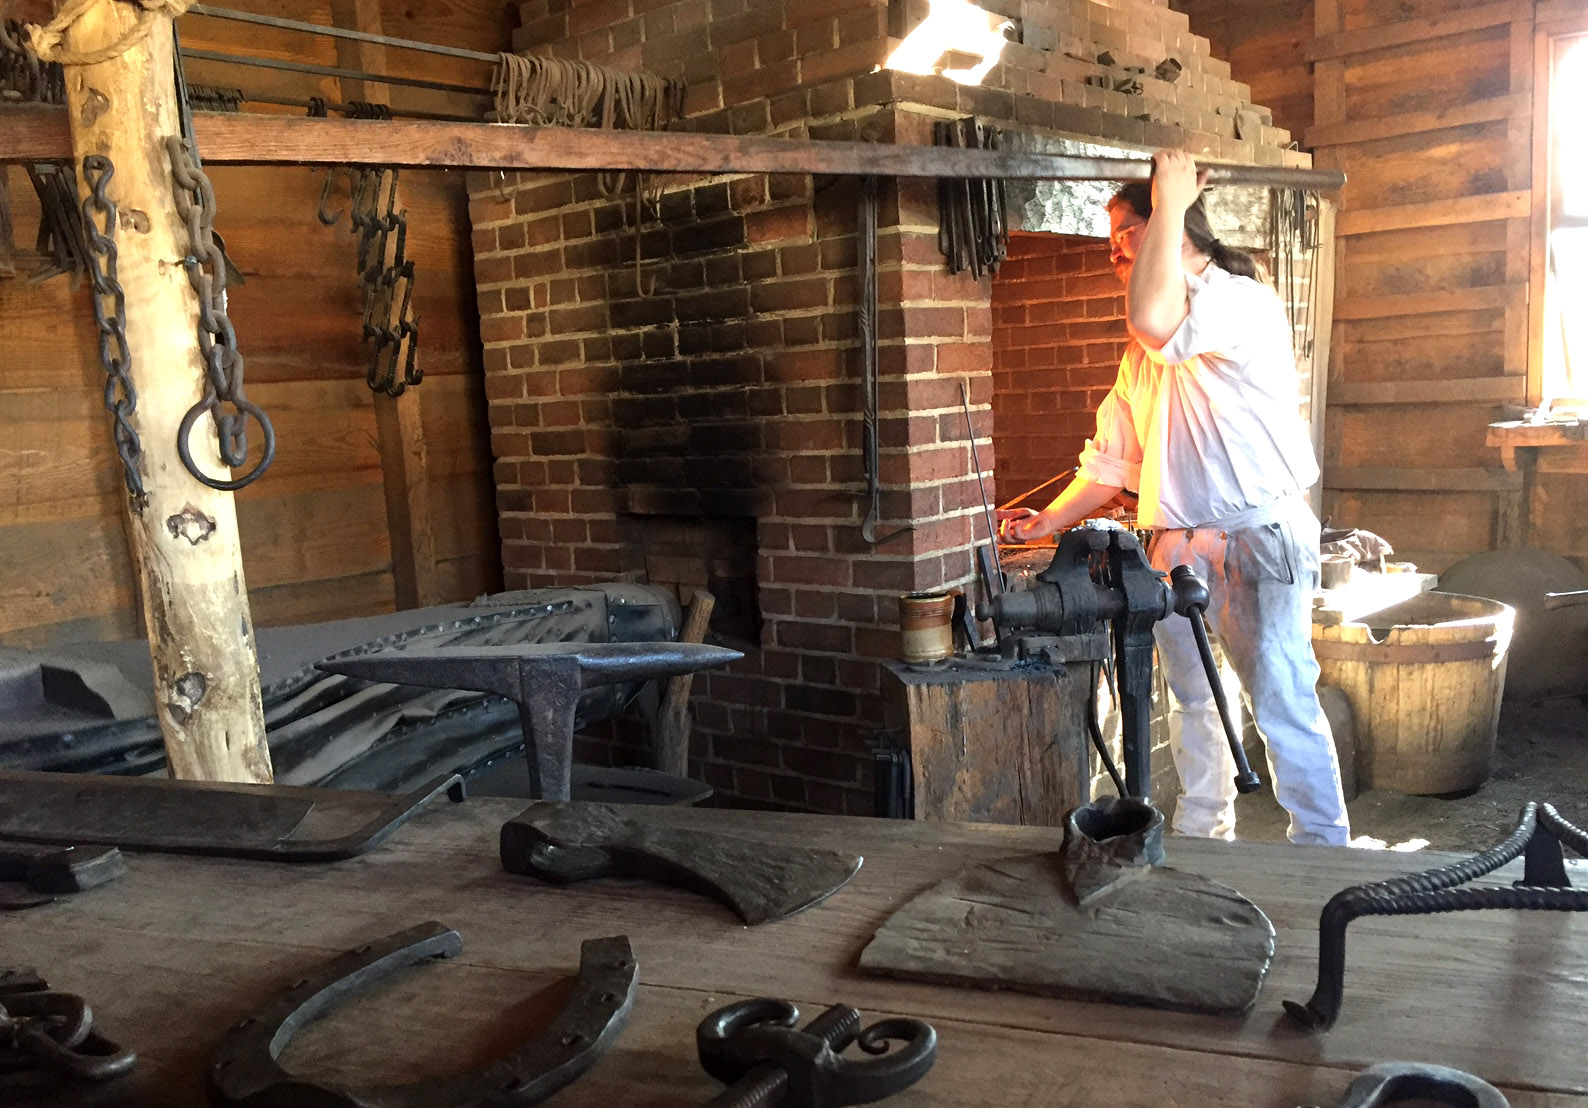 A blacksmith works at the forge at Mount Vernon on Monday, Feb. 20, 2017. (WTOP/Rich Johnson)